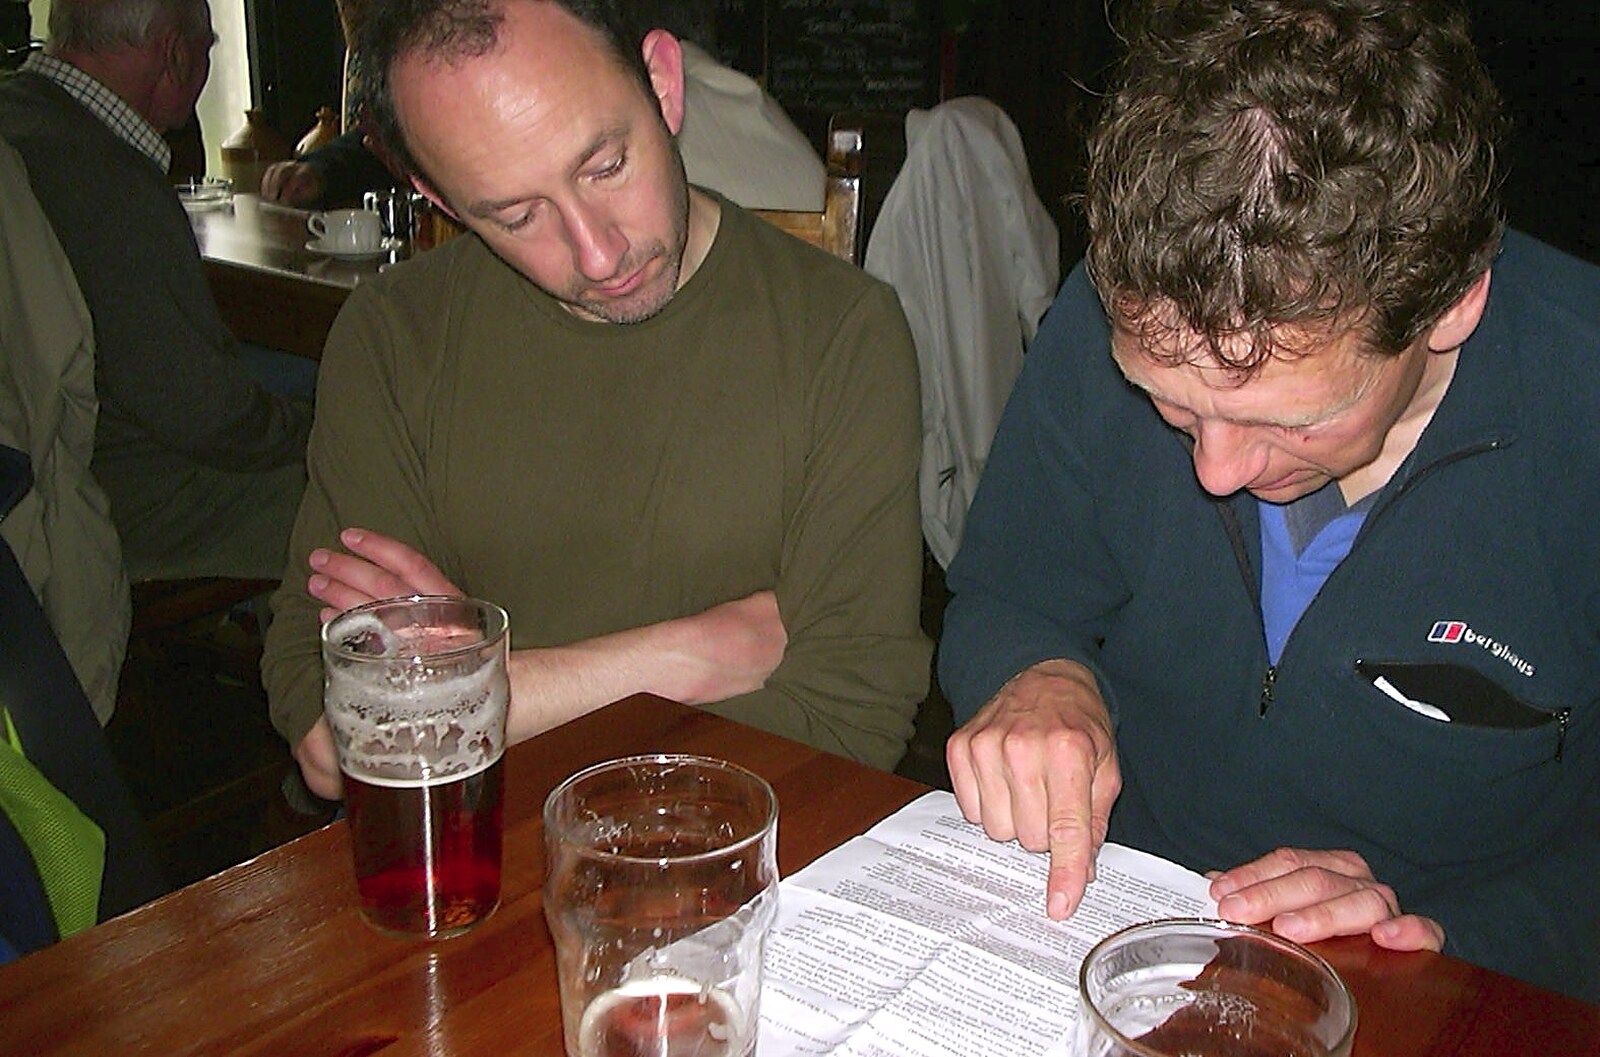 The BSCC Annual Bike Ride, Lenham, Kent - 8th May 2004: Apple checks the instructions for the next section